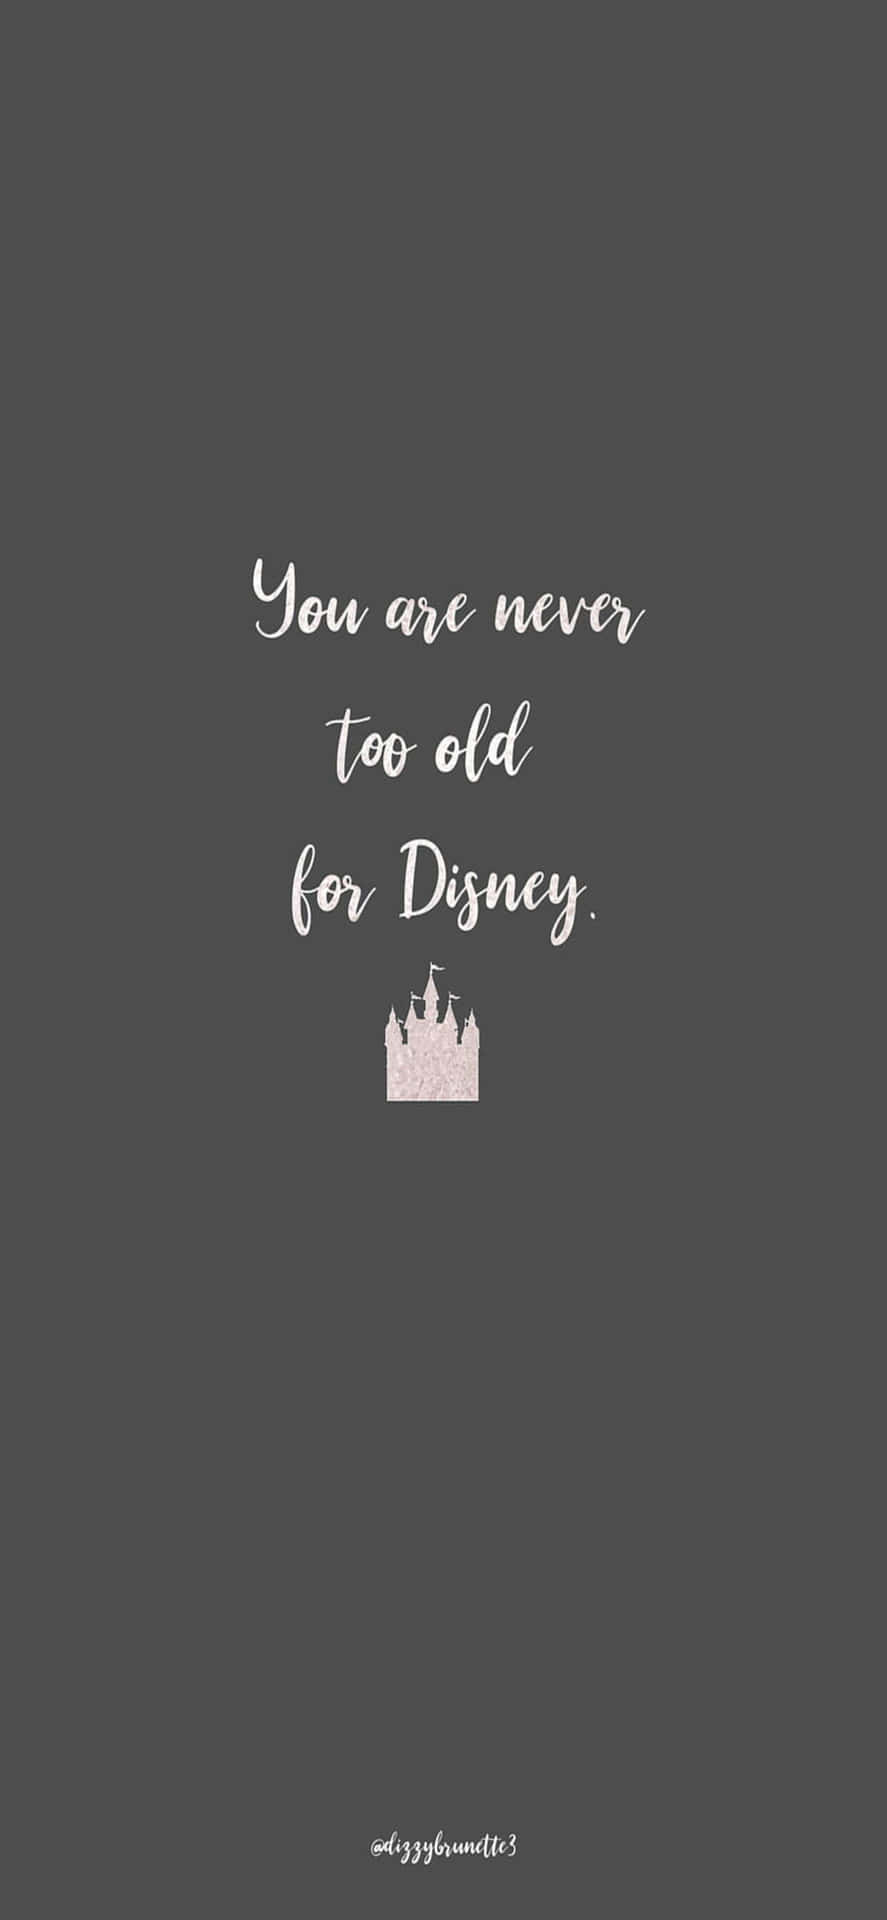 disney quote wallpapers for iphone